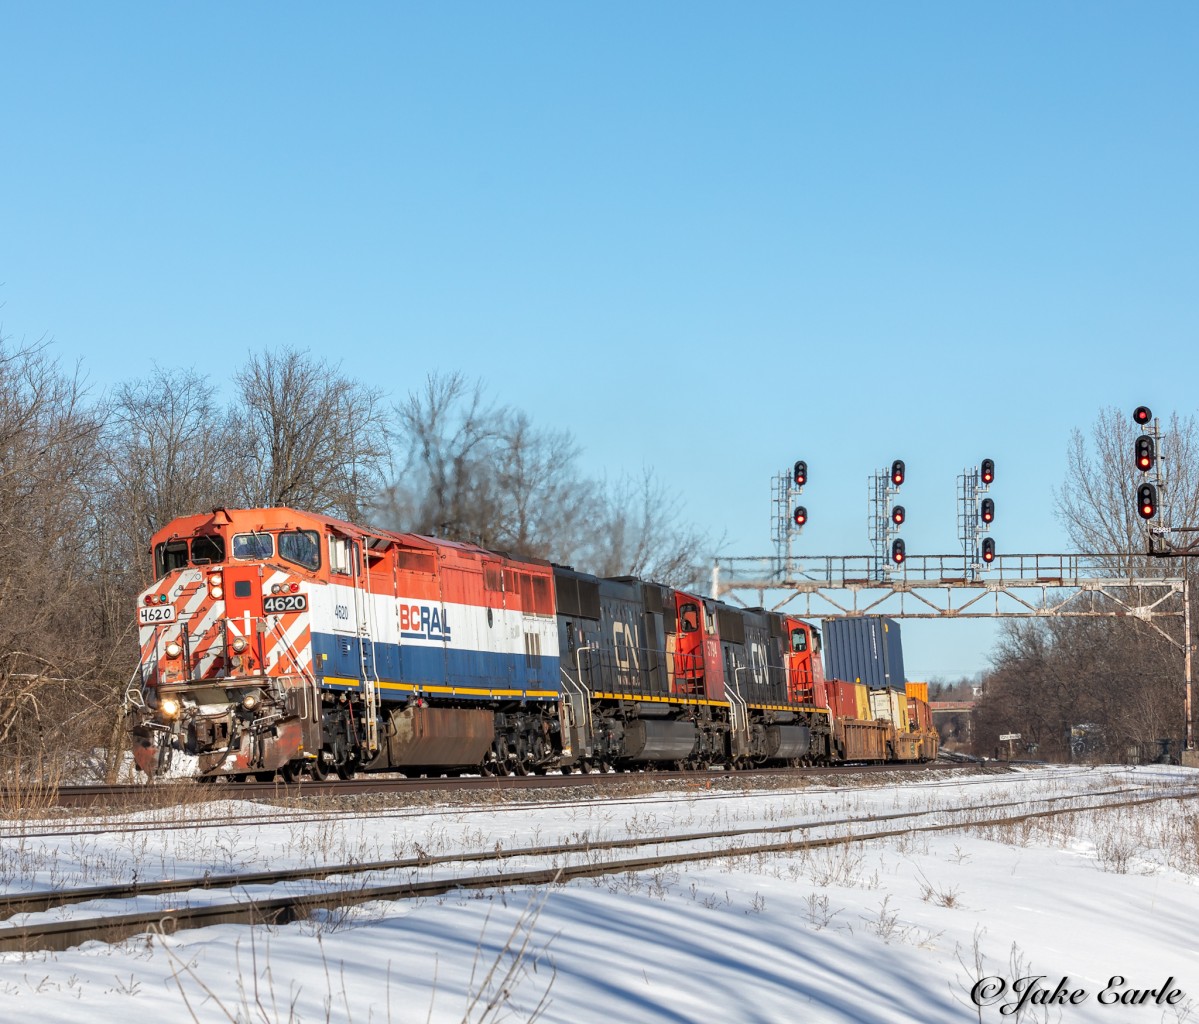 A late CN Z149 passes through Brockville yard, with BCOL 4620 on the point, and two CN SD75i’s trailing as they haul stacks towards Chicago.